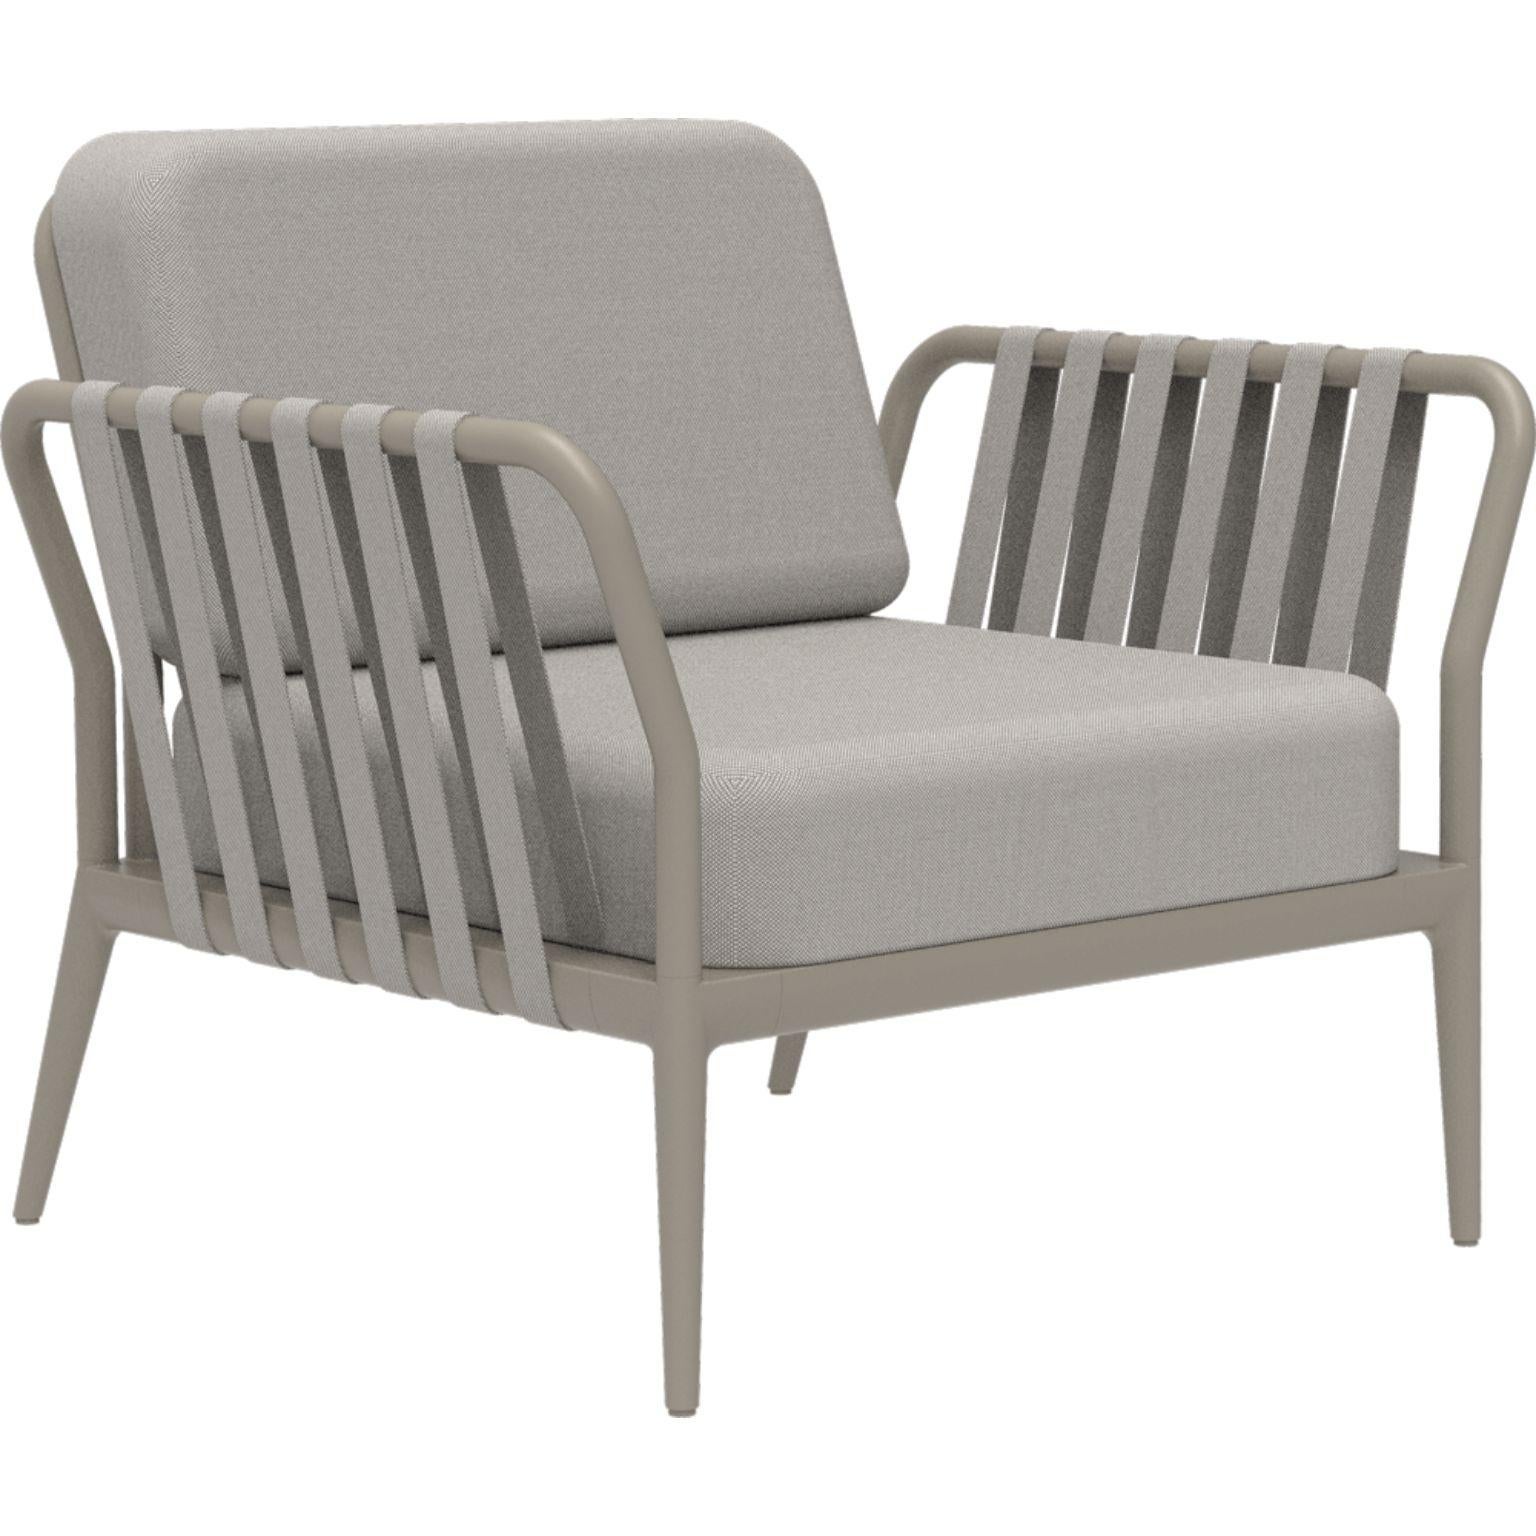 Ribbons cream armchair by Mowee.
Dimensions: D83 x W91 x H81 cm (Seat Height 42 cm)
Material: Aluminium, Upholstery
Weight: 20 kg
Also Available in different colours and finishes.

An unmistakable collection for its beauty and robustness. A